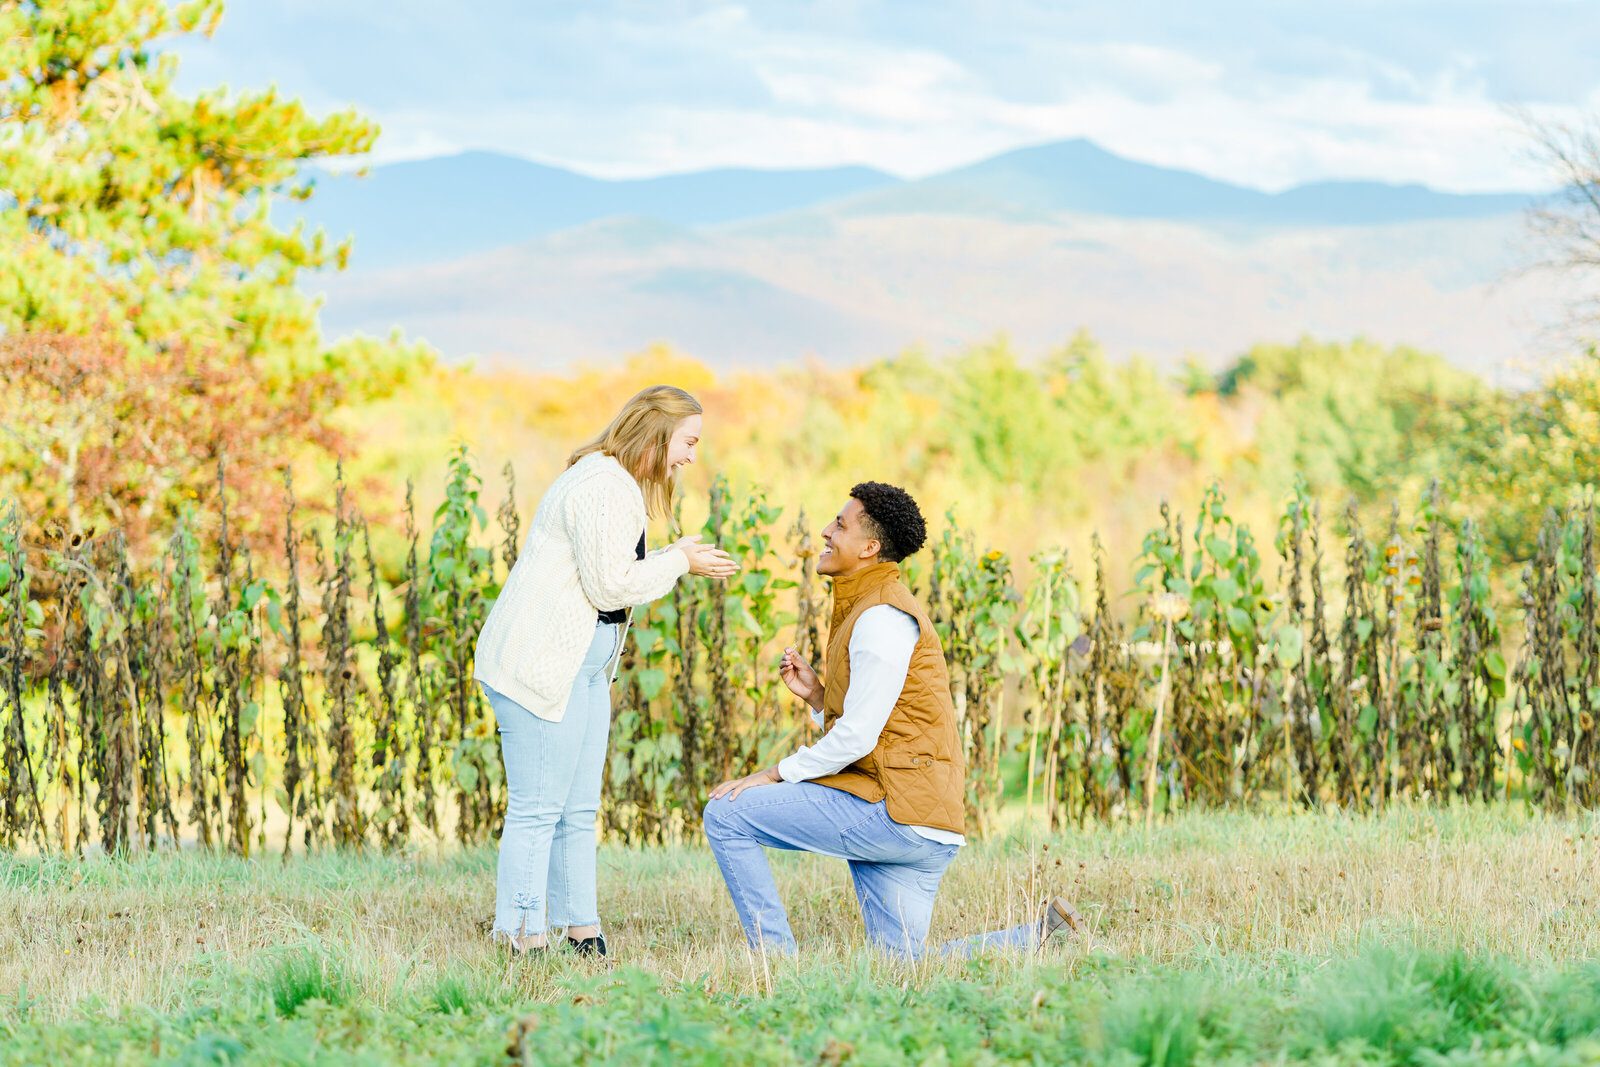 Man down on one knee proposing with New Hampshire mountains in background